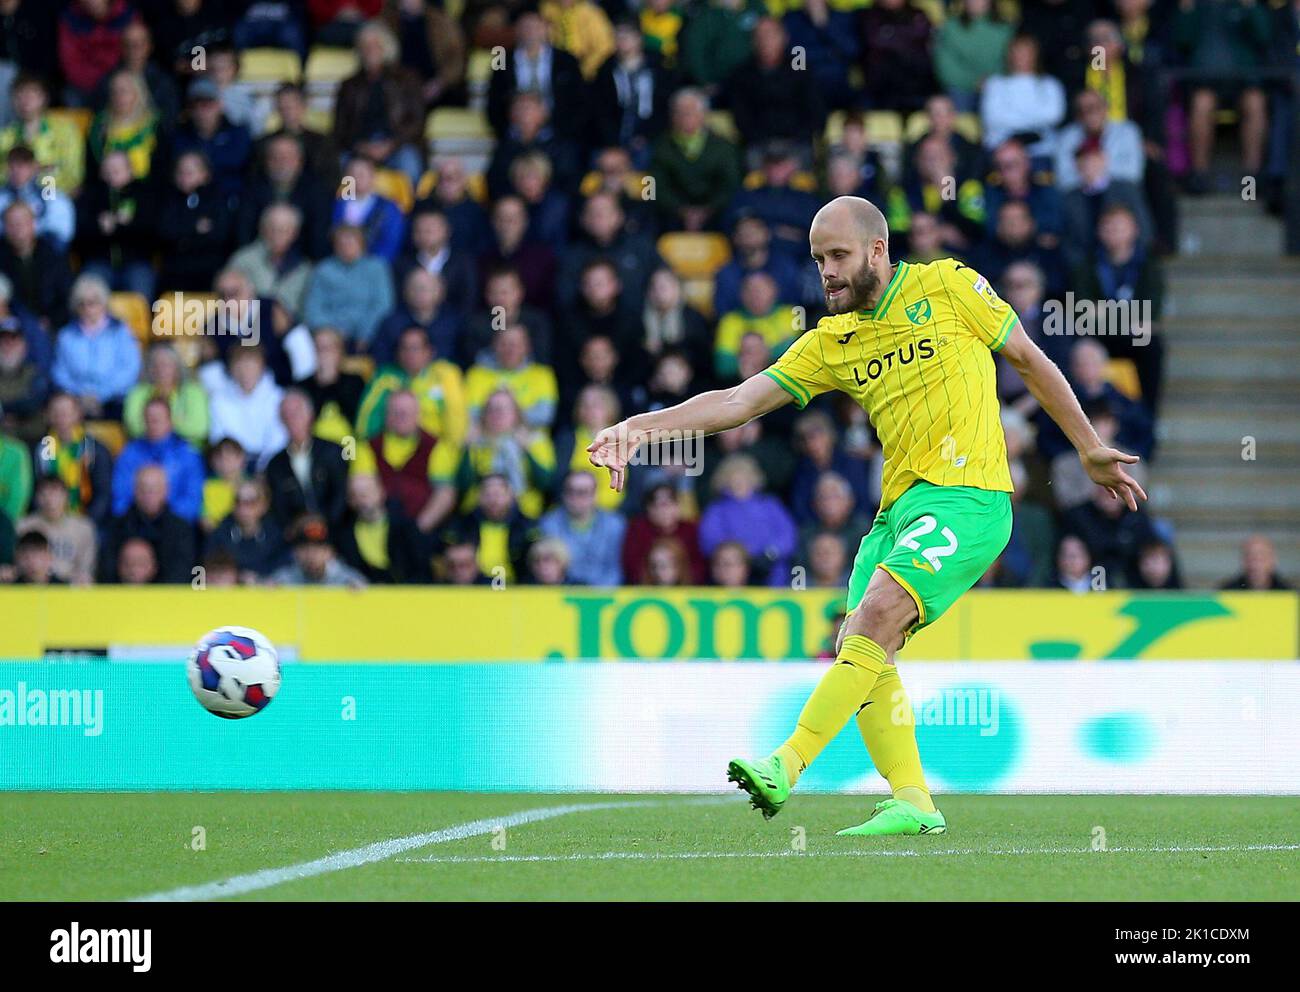 Norwich City's Teemu Pukki makes a shot which leads to their first goal of the game scored by team-mate Sam Byram (not pictured) during the Sky Bet Championship match at Carrow Road, Norwich. Picture date: Saturday September 17, 2022. Stock Photo